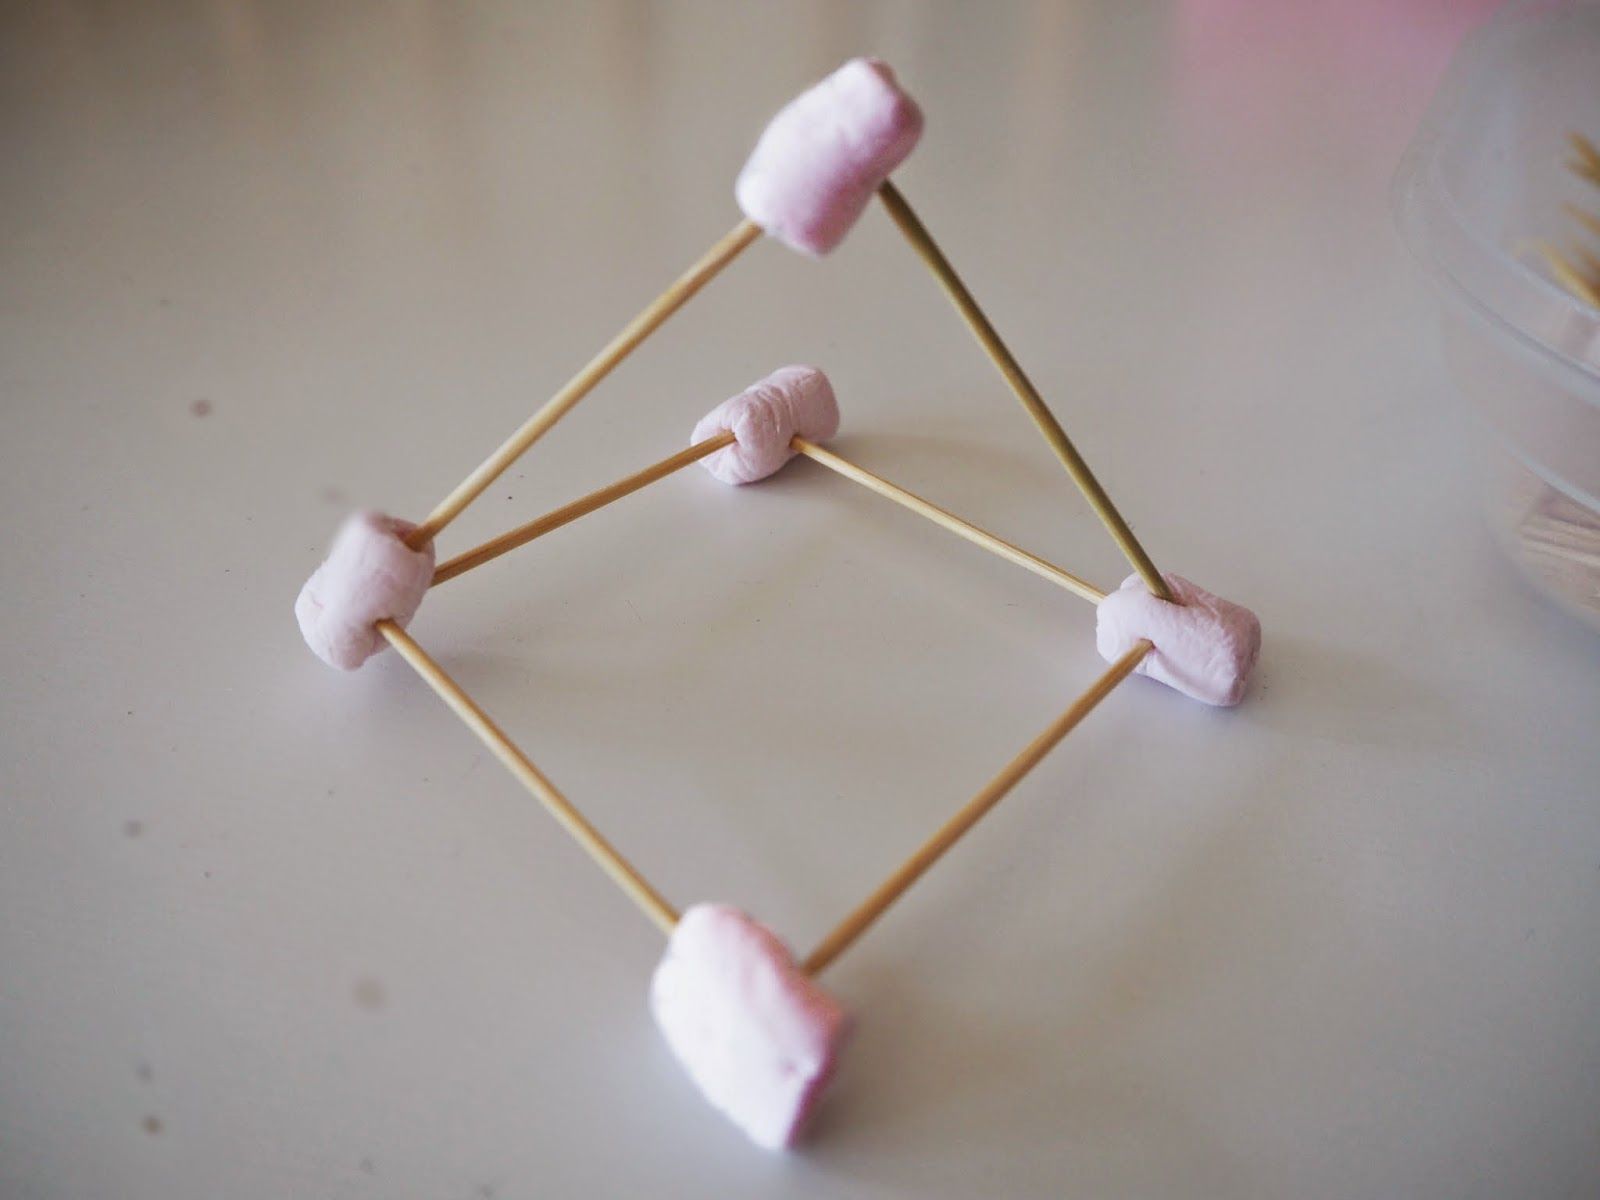 Marshmallow and toothpick structure